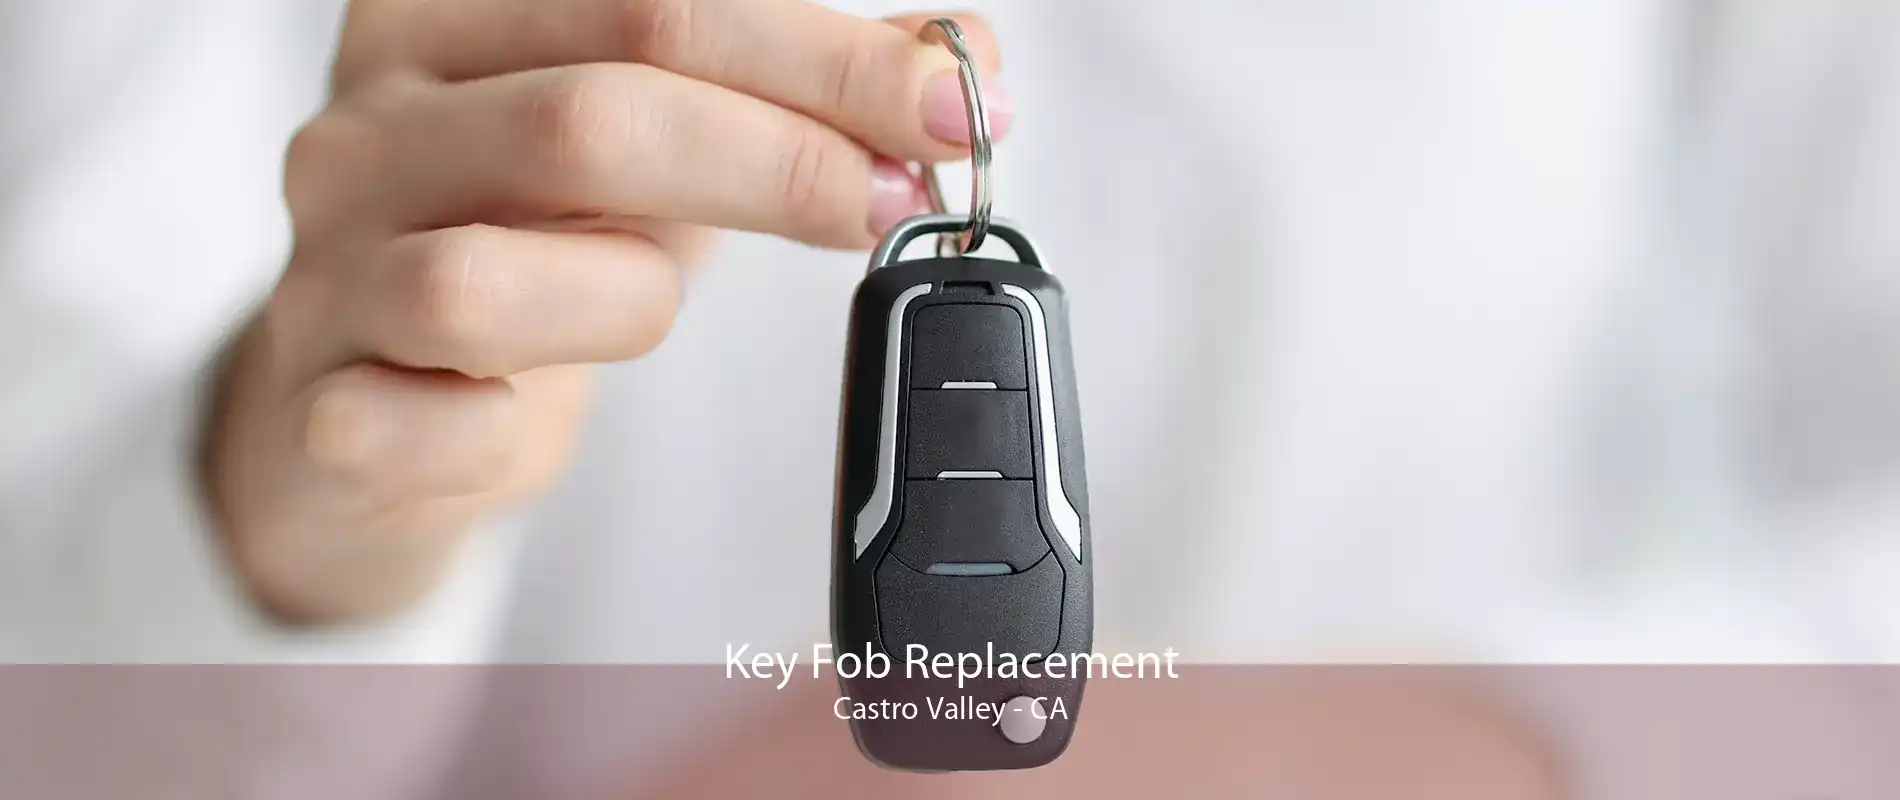 Key Fob Replacement Castro Valley - CA